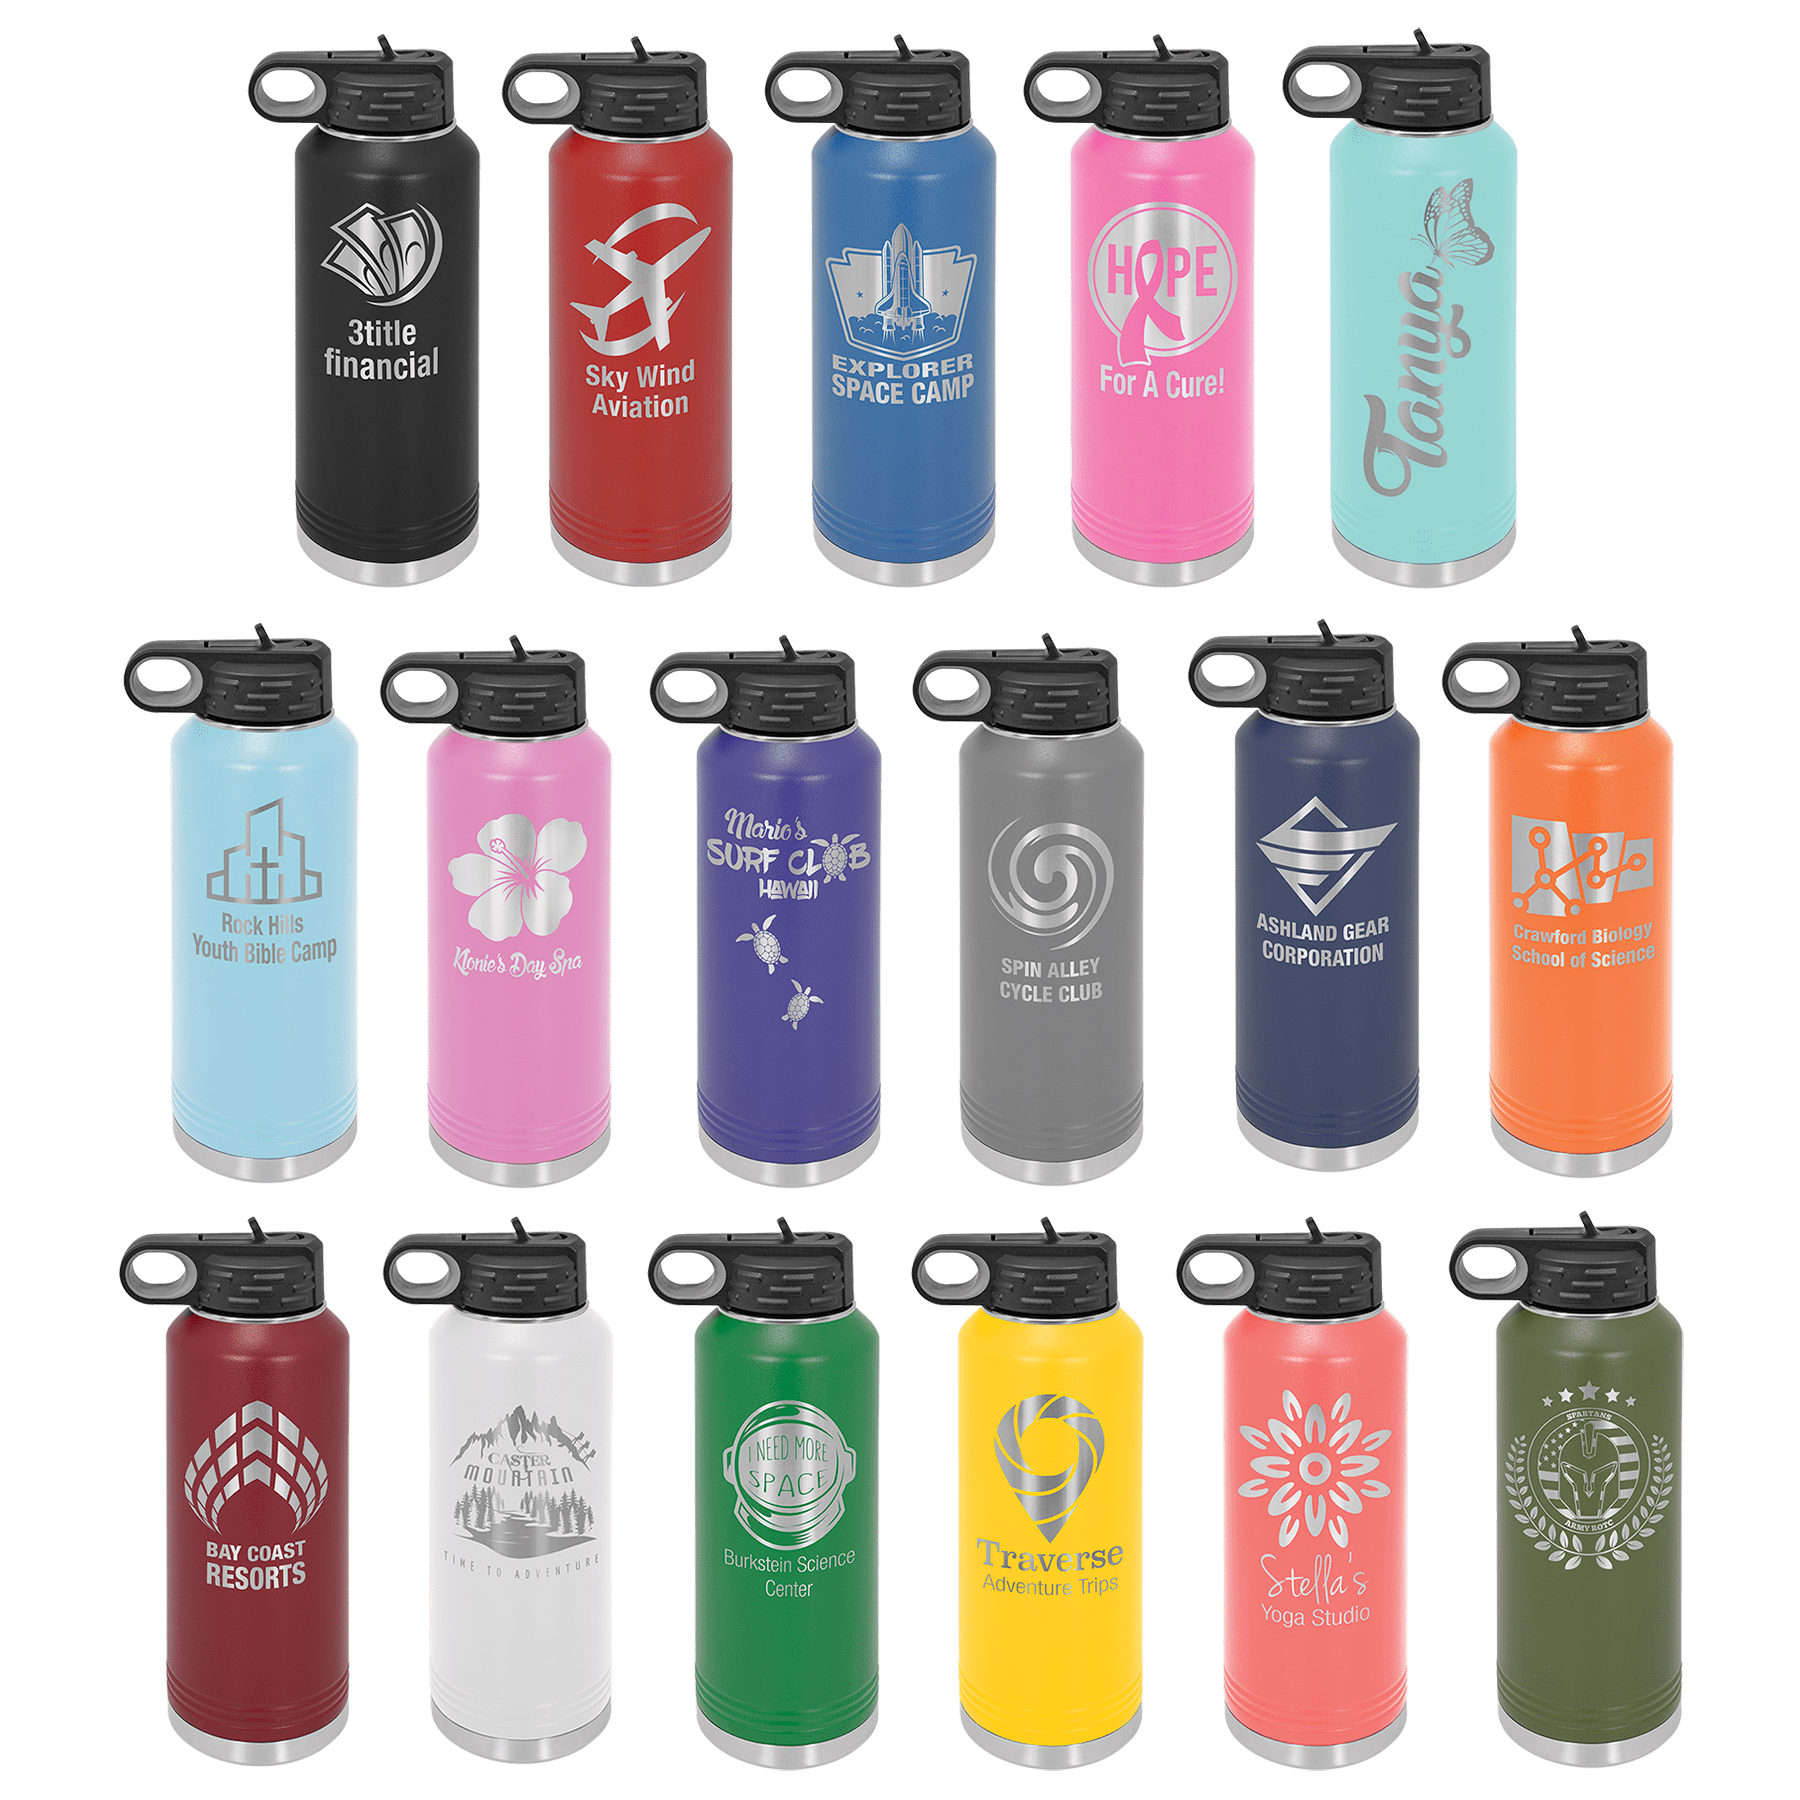 https://assets.emblemart.com/img/products/drinkware/colors.jpg